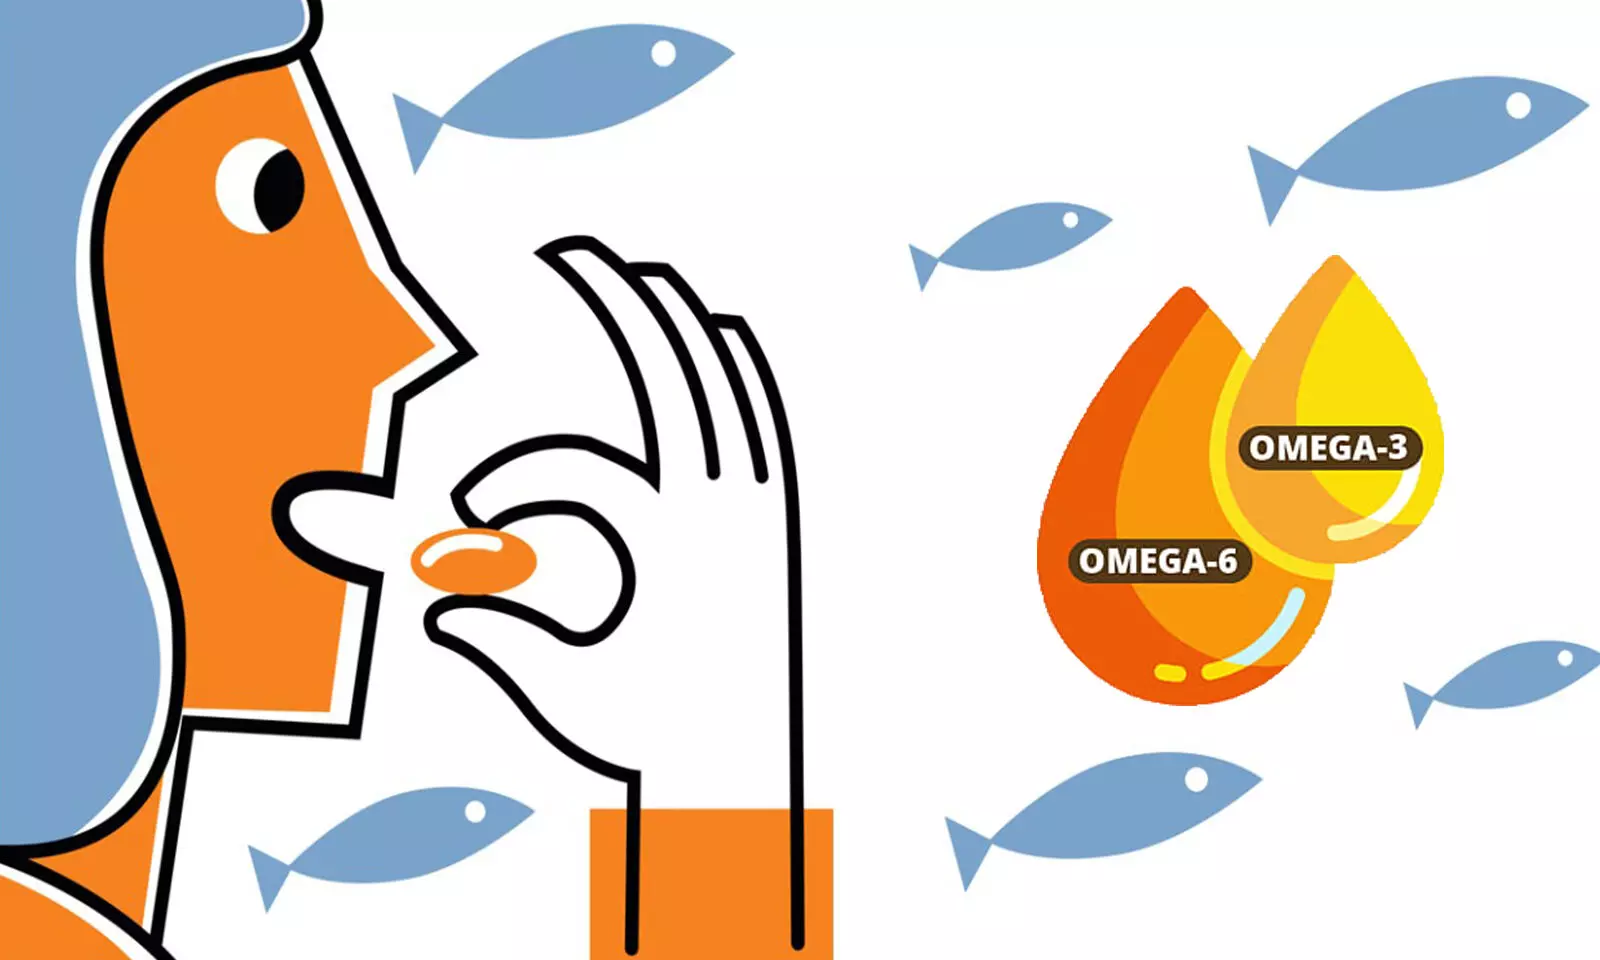 New Omega-3 fish oil with better taste and odor developed